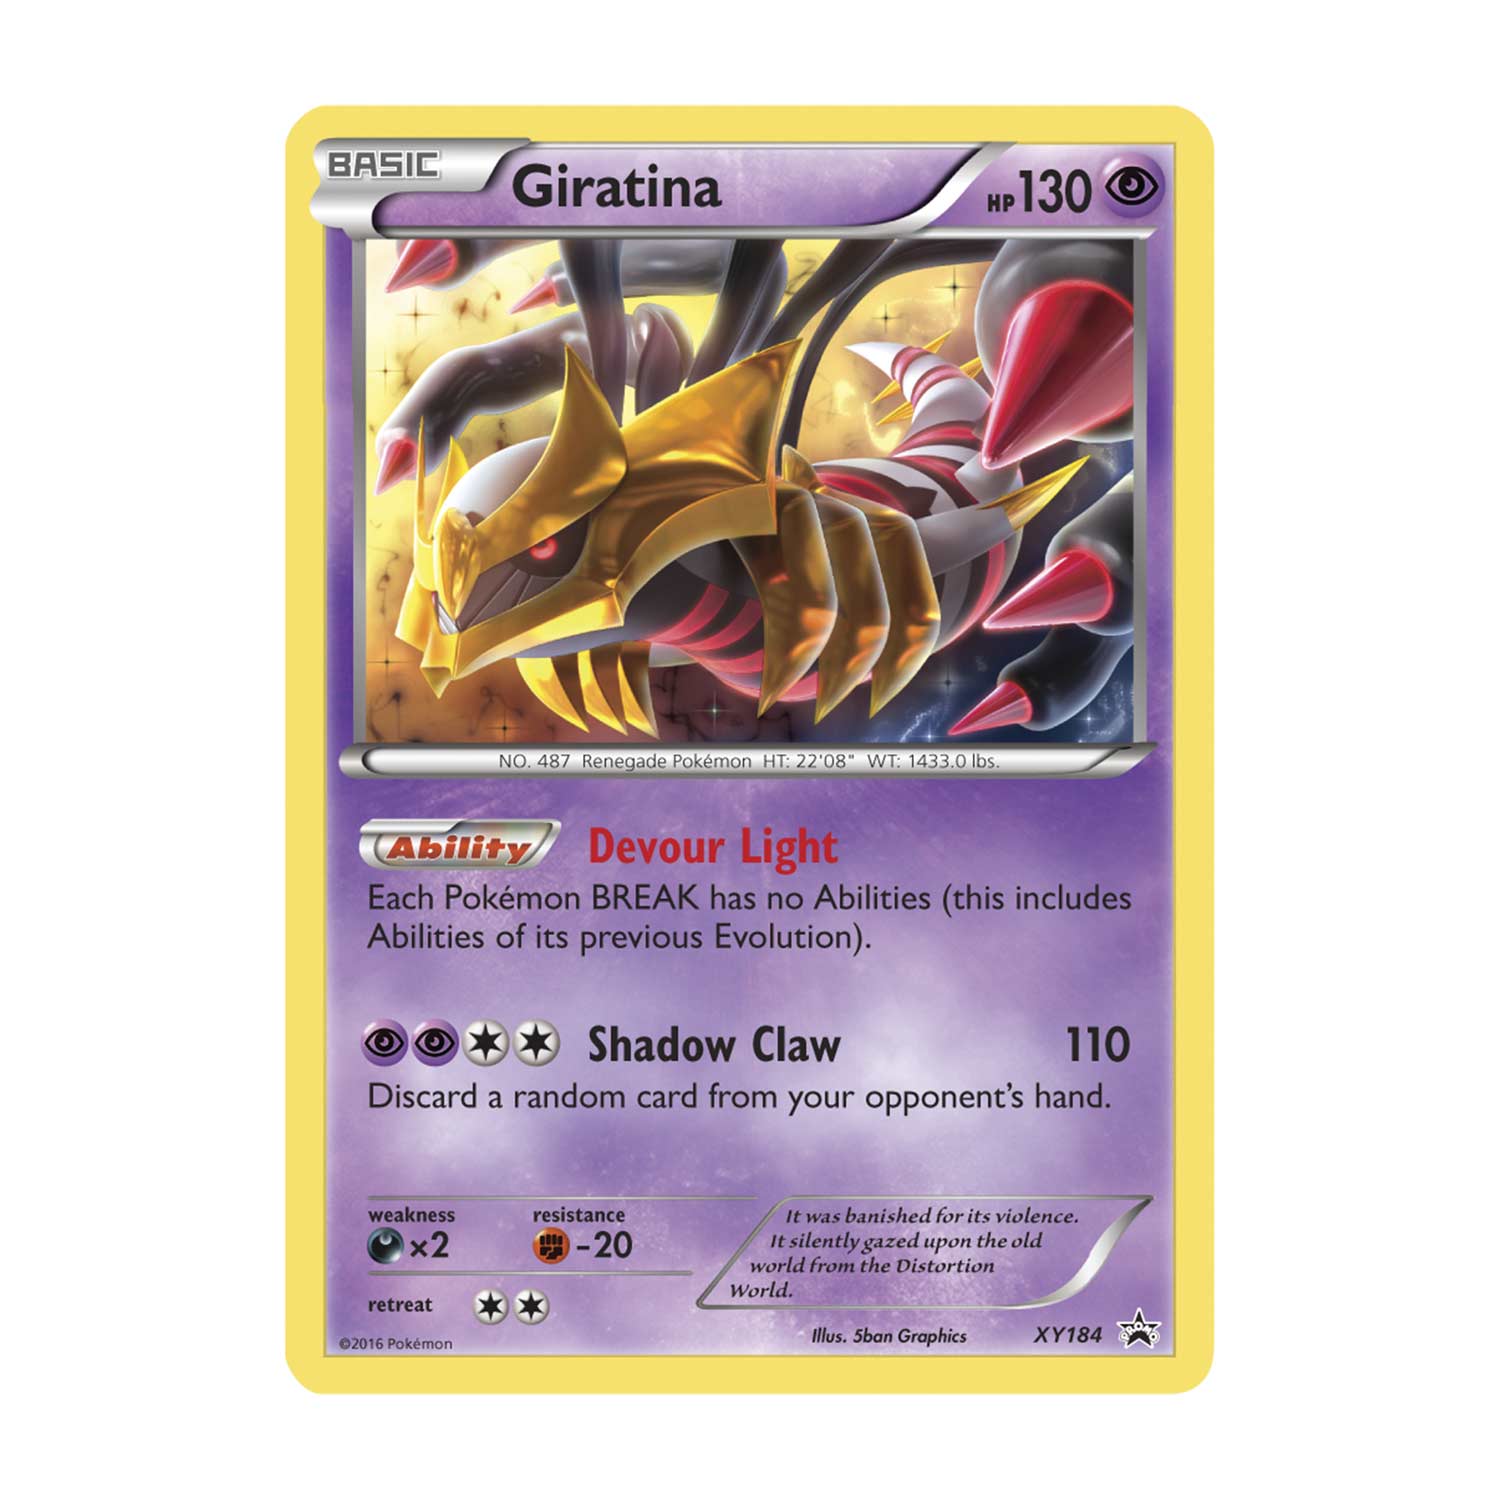 Pokémon TCG: 3 Booster Packs with Giratina Promo Card and Coin